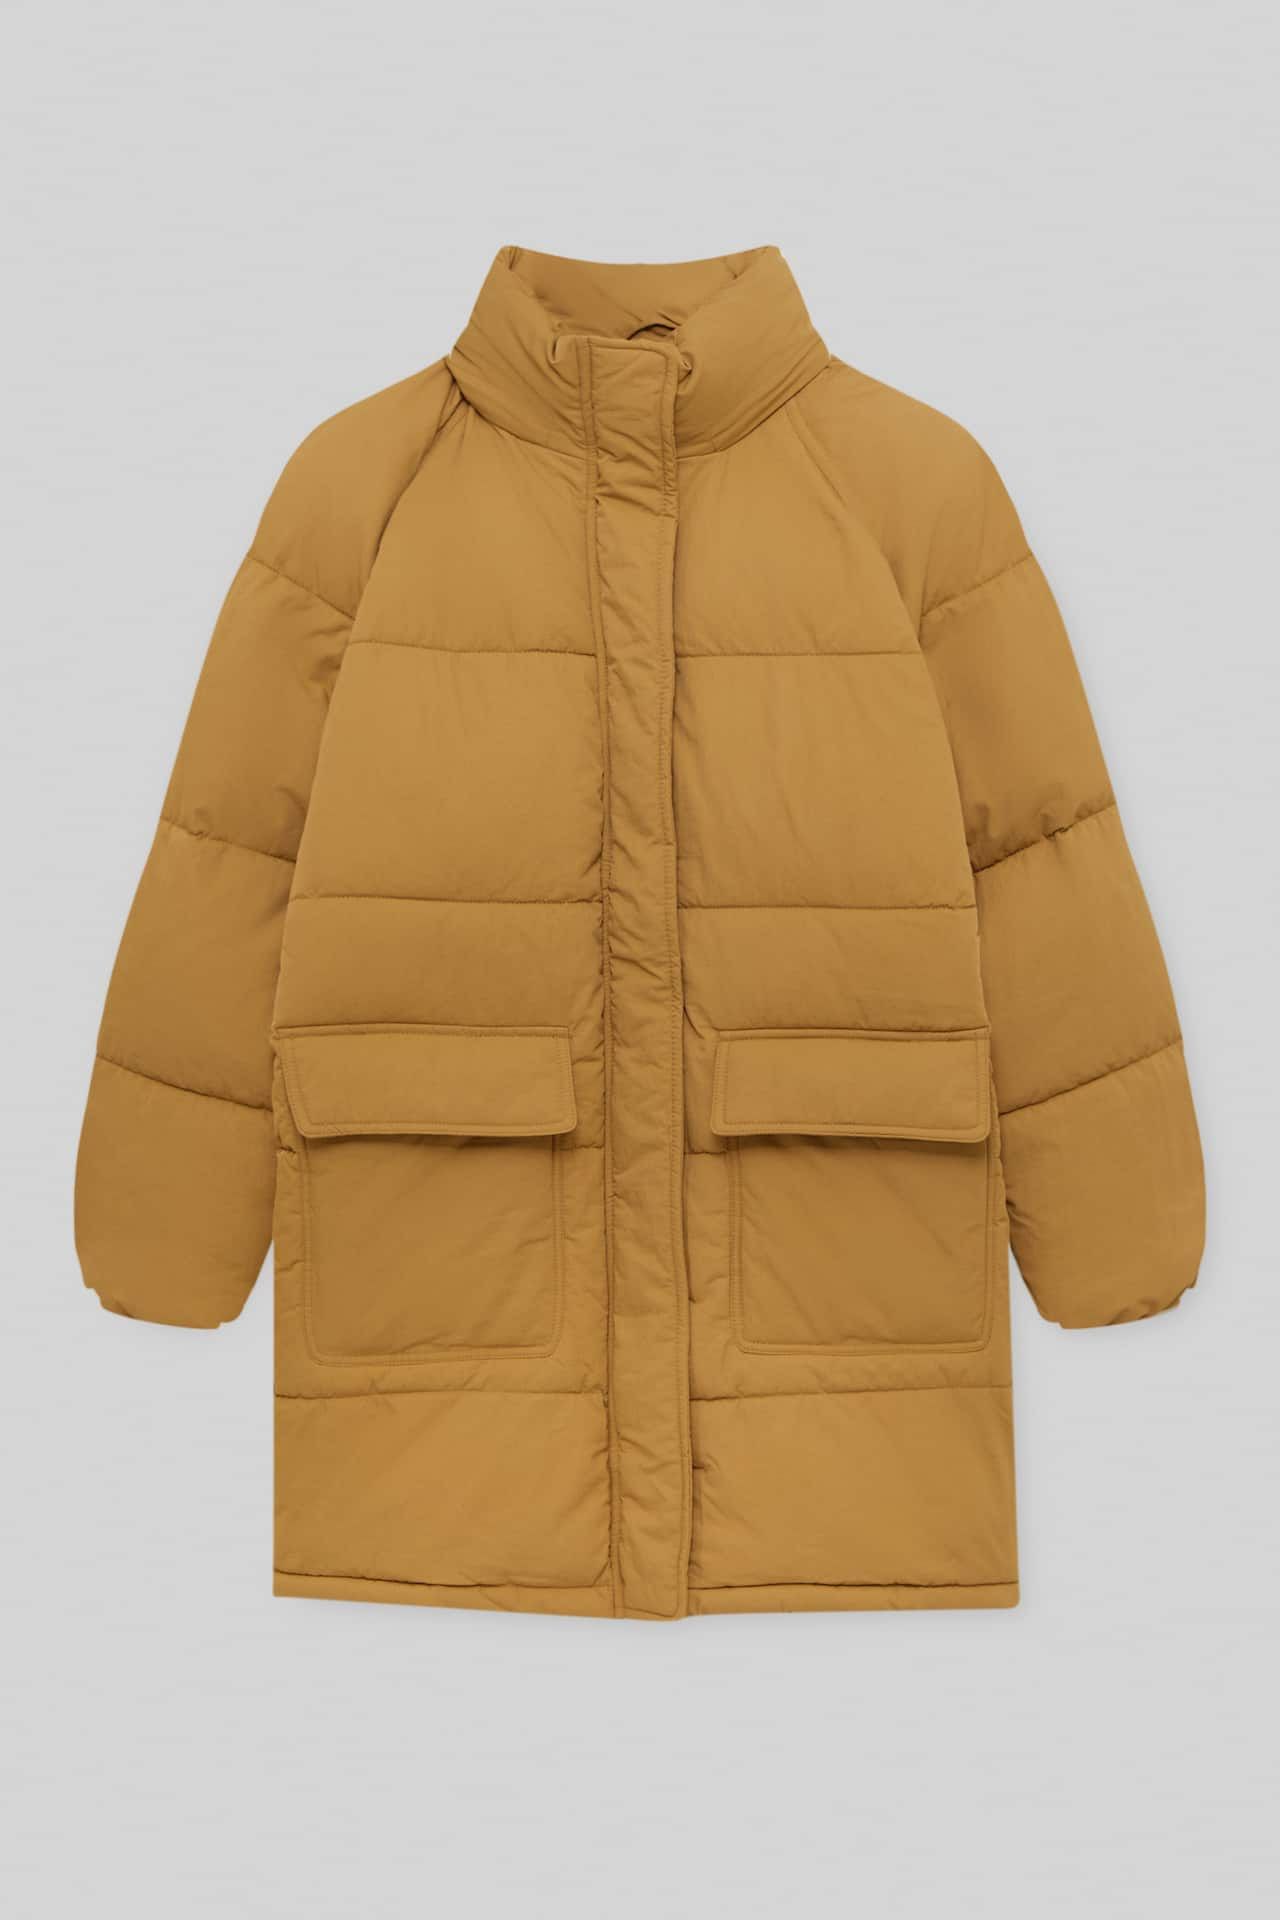 Quilted raglan sleeve coat | Camel Coat | Winter Puffer Coat | Winter Outfit Inspo | PULL and BEAR UK